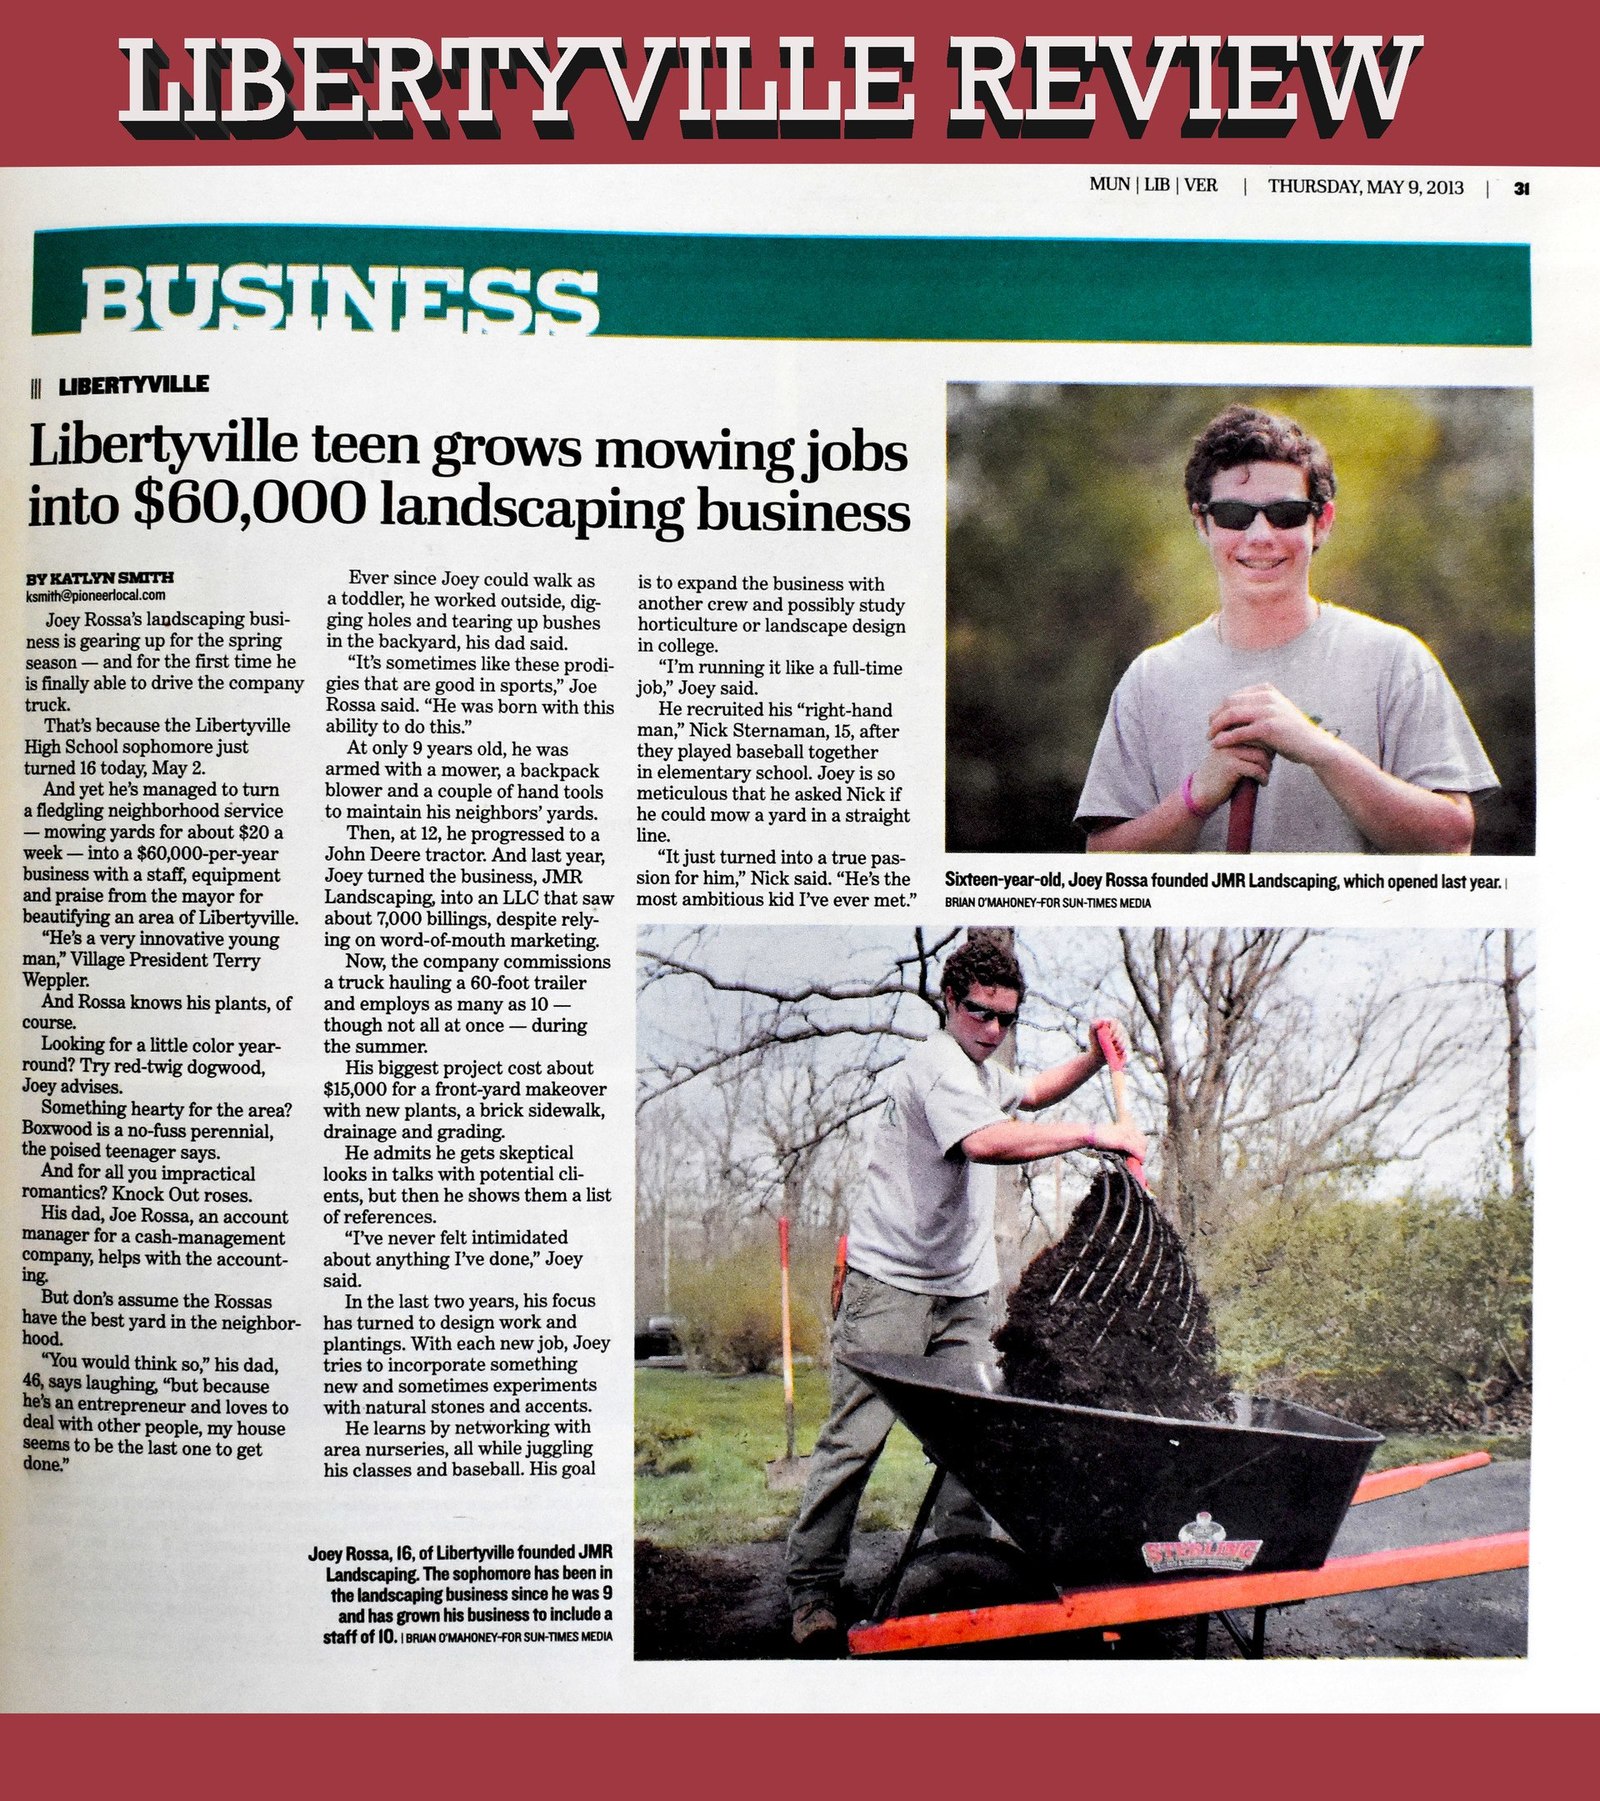 Teenage Rossa Propels JMR Landscaping to New Heights